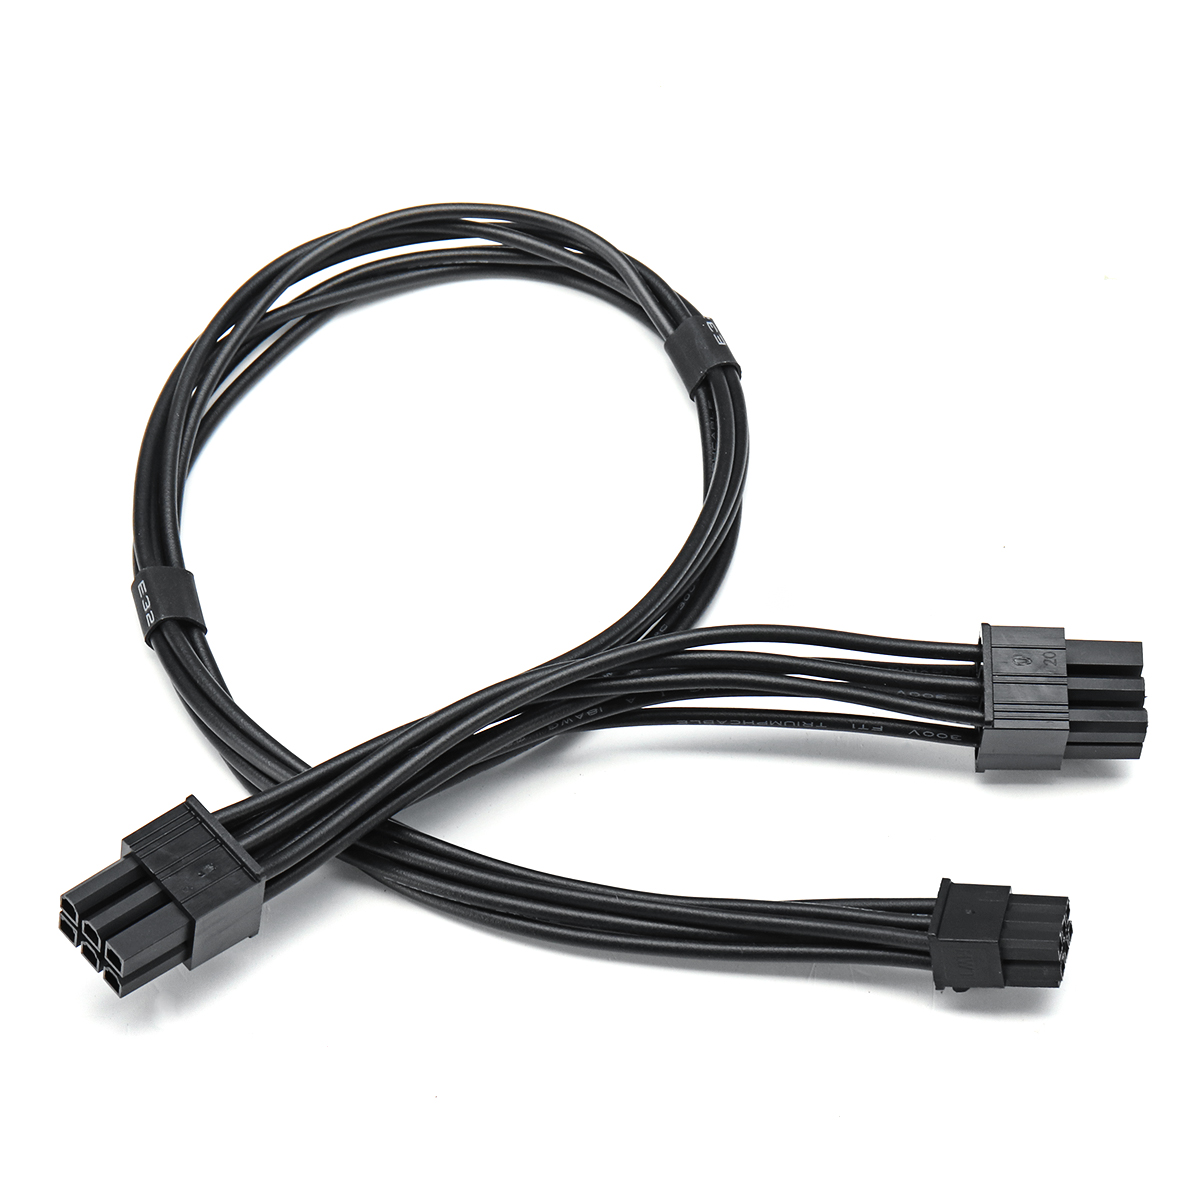 Pcie Pci-e Power Cable For Mac